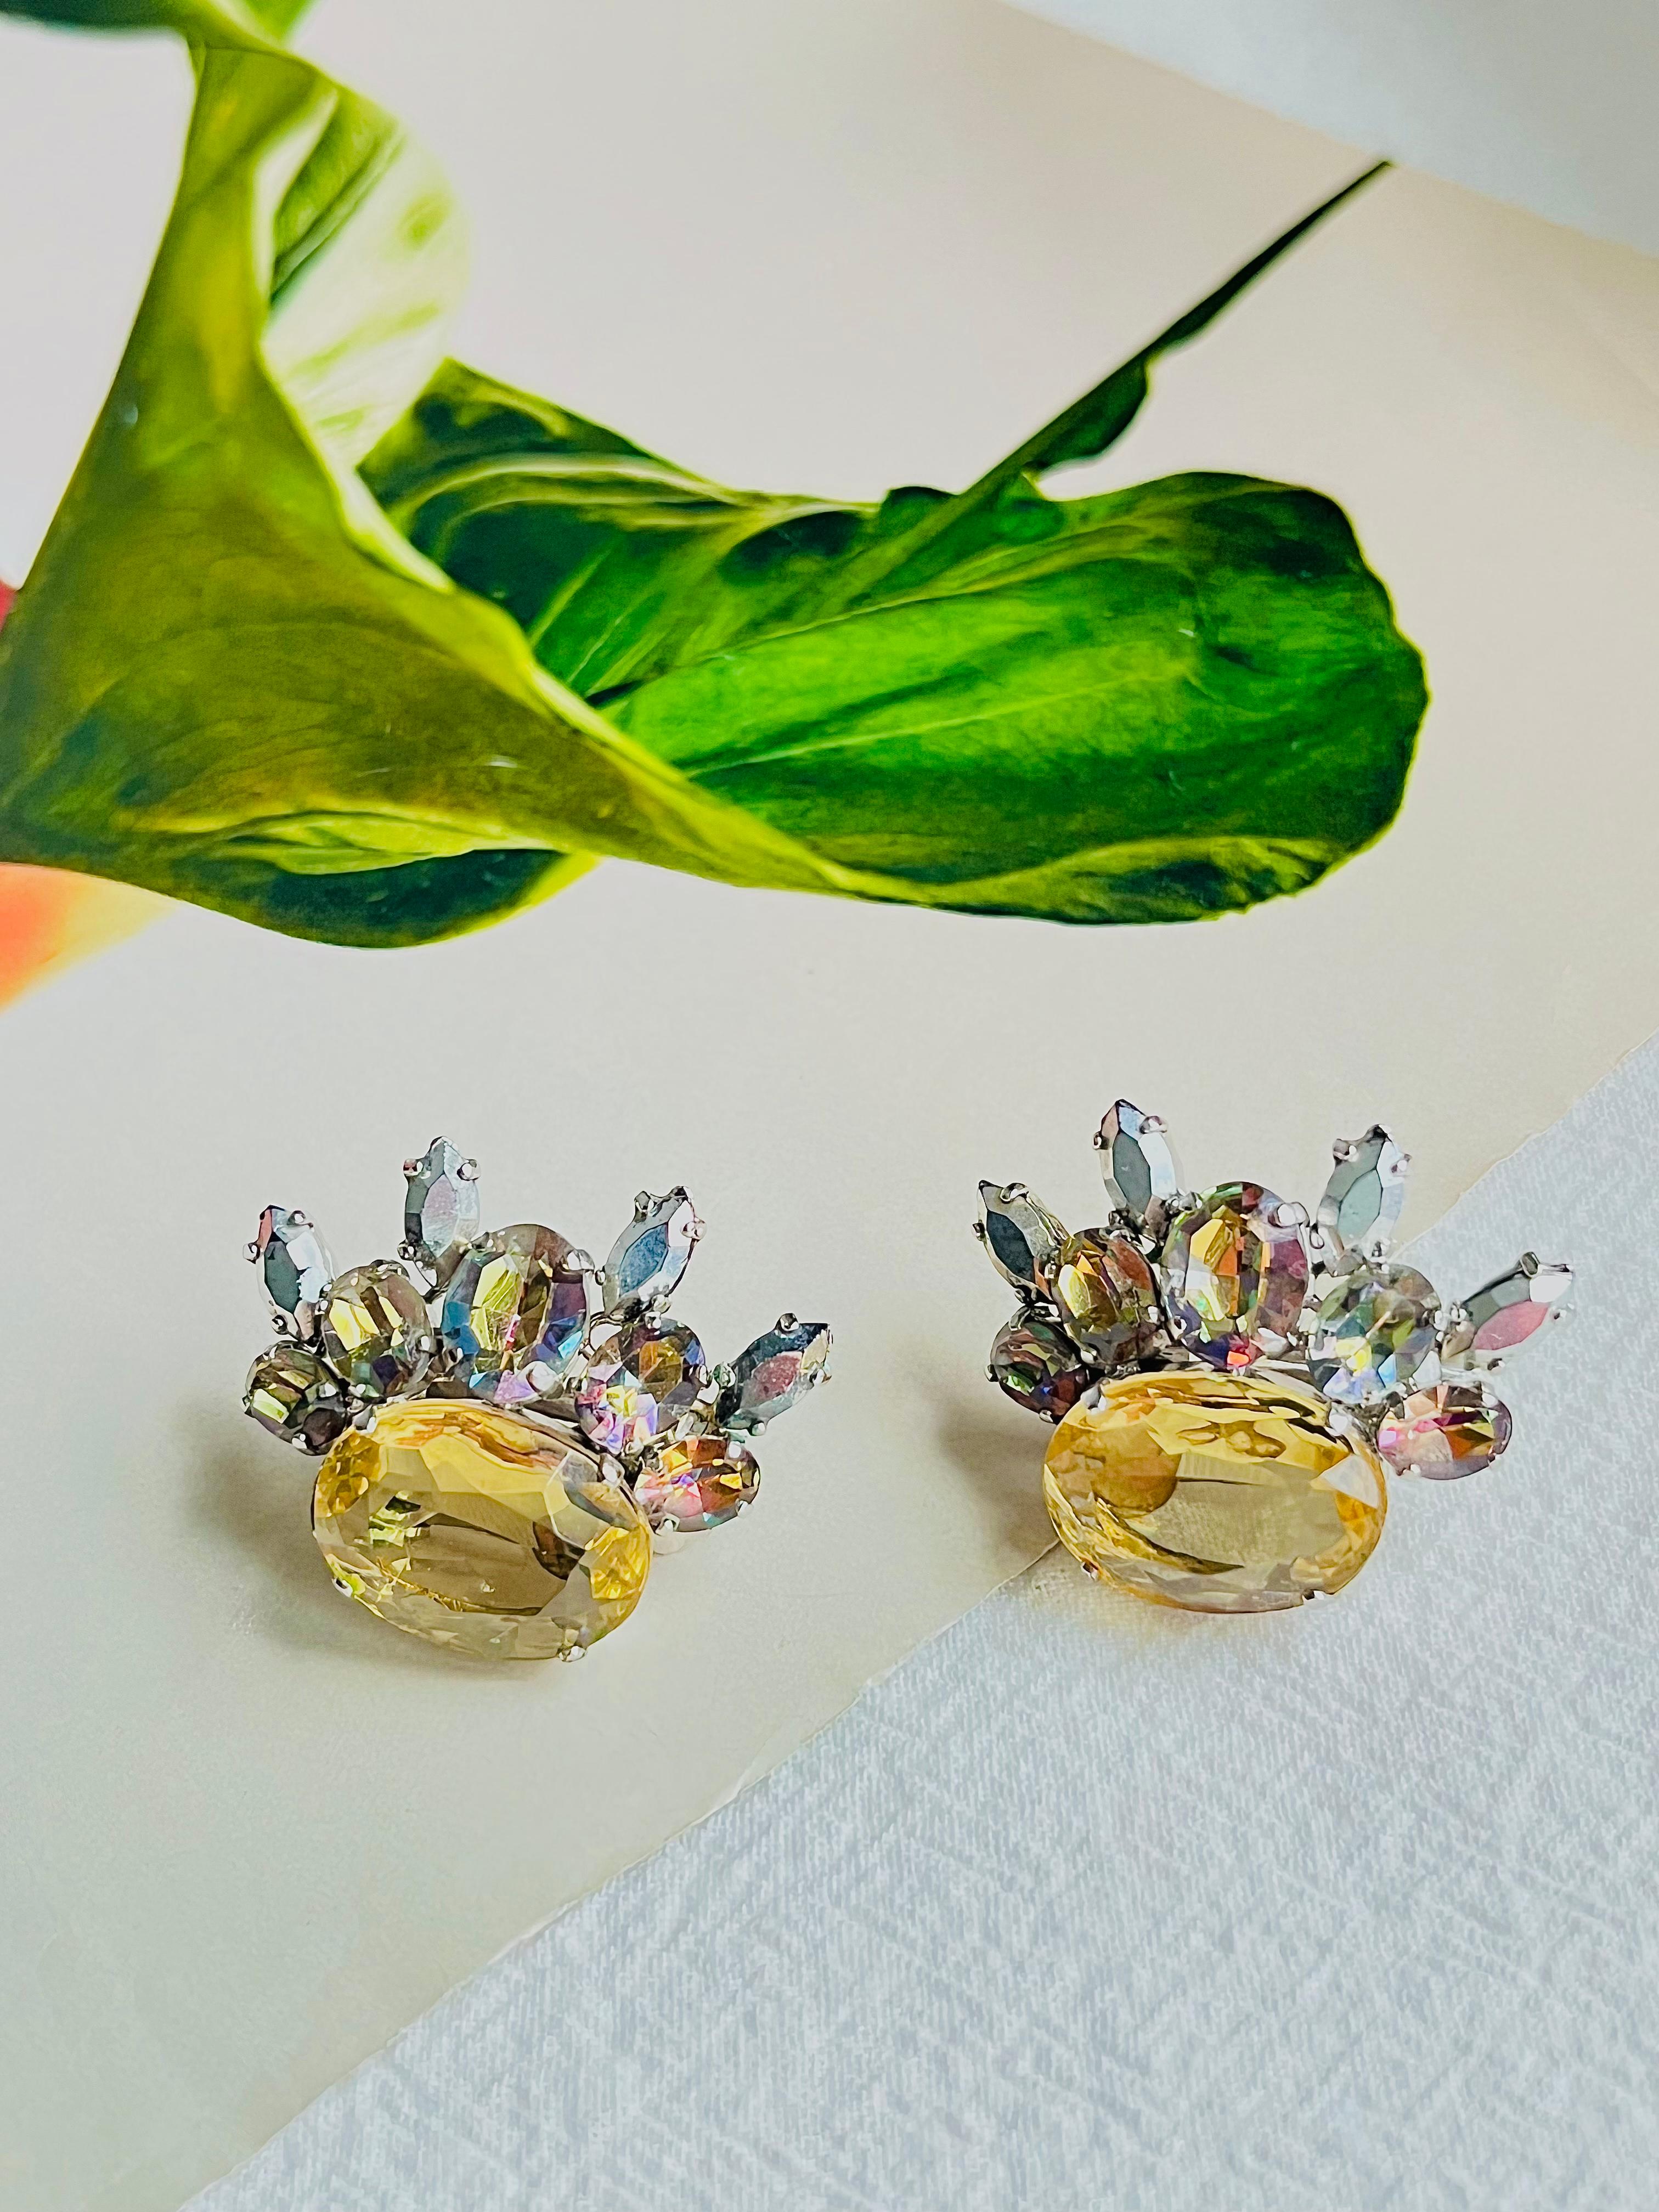 Christian Dior 1958 Vintage Floral Wing Iridescent Yellow Crystal Elegant Clip Earrings, Silver Tone

Very good condition. Light scratches, barely noticeable. 100% Genuine. Rare to find. 

A very beautiful pair of earrings by Chr. Dior, signed at